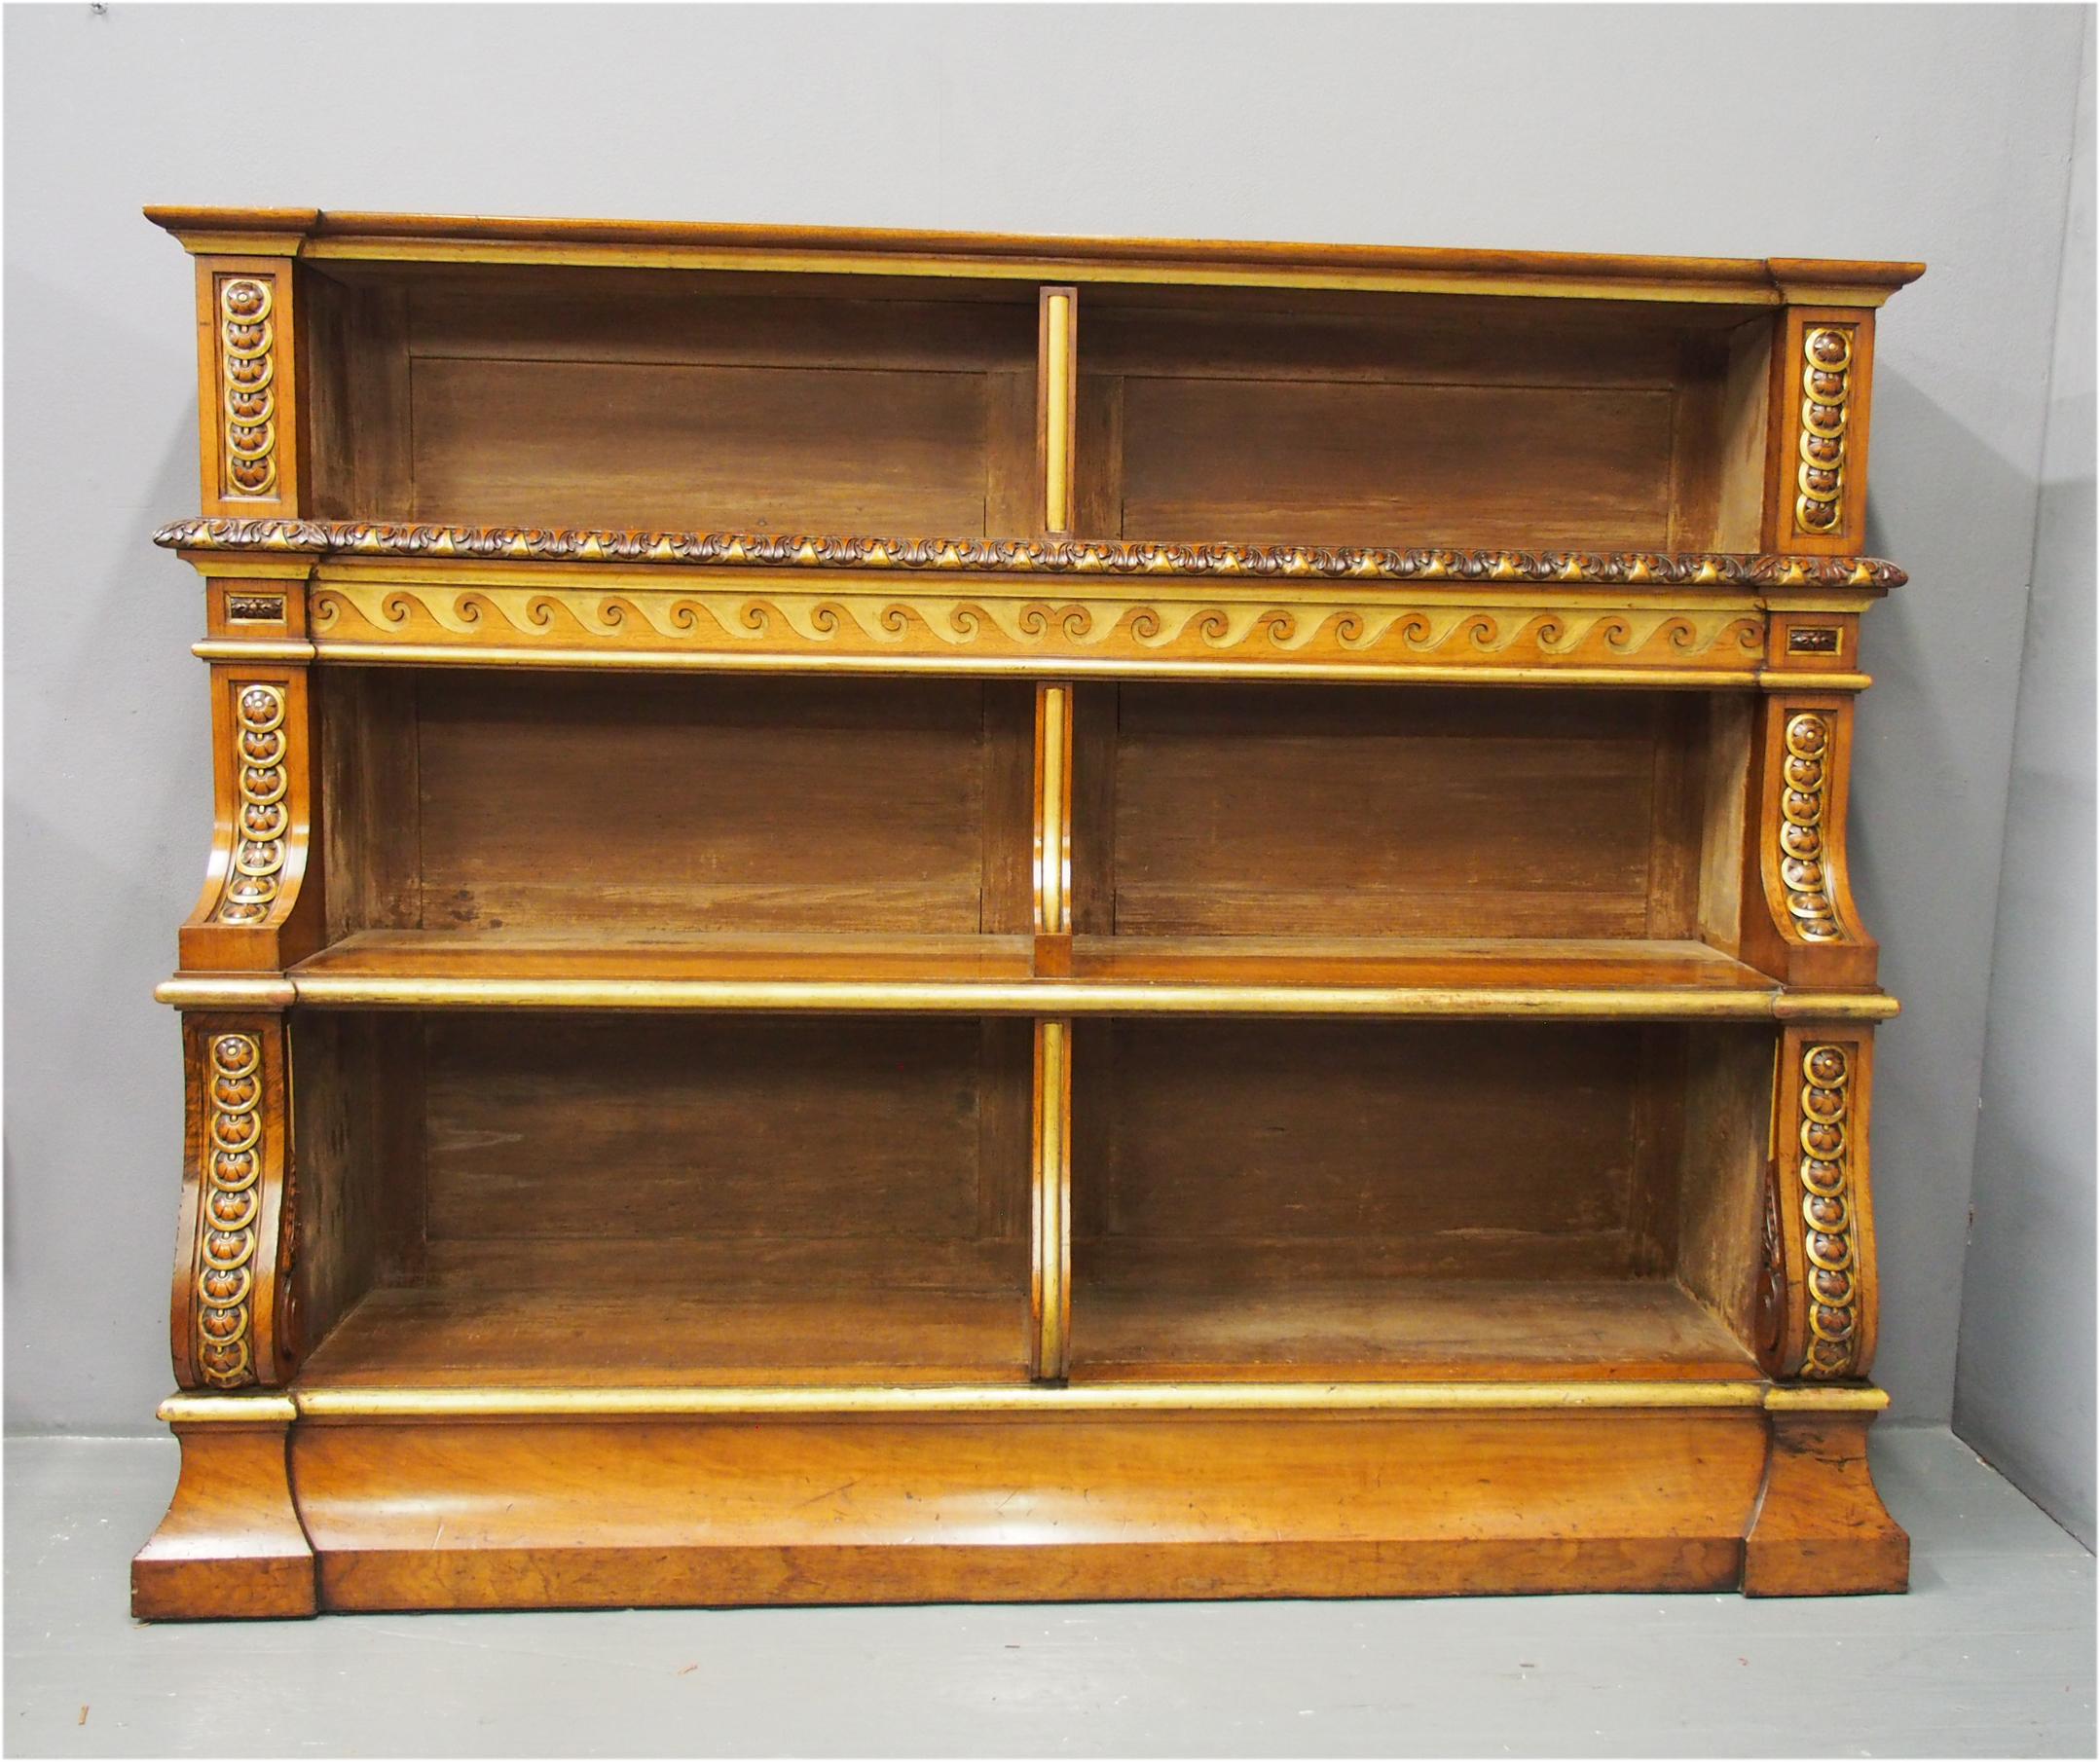 Mid Victorian carved and gilded walnut waterfall bookcase, circa 1850. With solid walnut top and the 3 shelves are divided into 2 sections. Flanked by pilasters carved with rondels and flower heads featuring gilded bezels. The top shelf has a